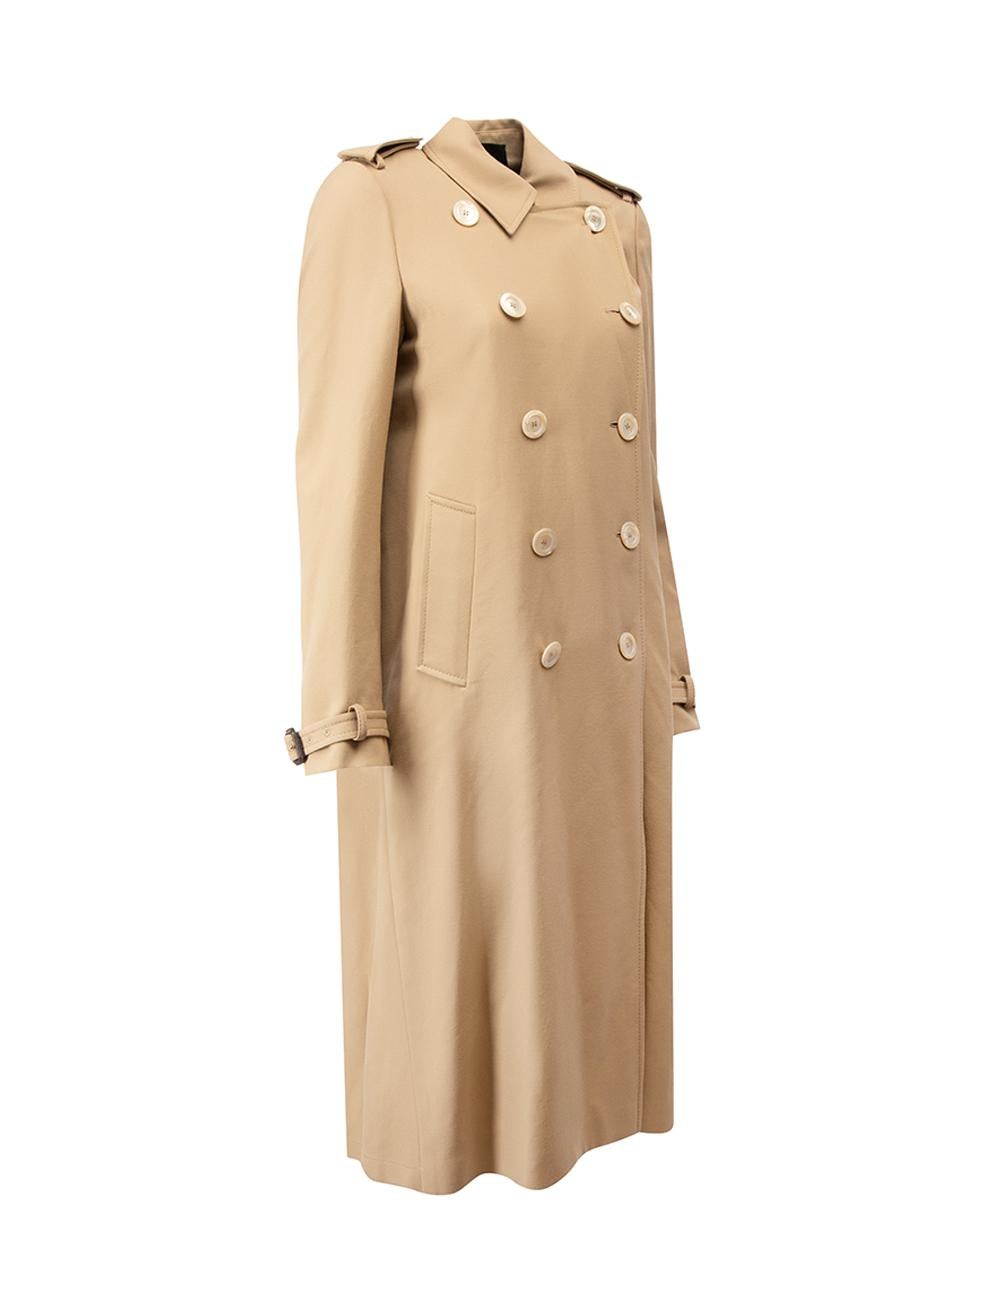 CONDITION is Never Worn. No visible wear to coat is evident on this used Gucci designer resale item. This item comes with original garment bag.



Details


Beige

Wool

Long trench coat

Double breasted

Buckled straps on cuffs

Back pleated